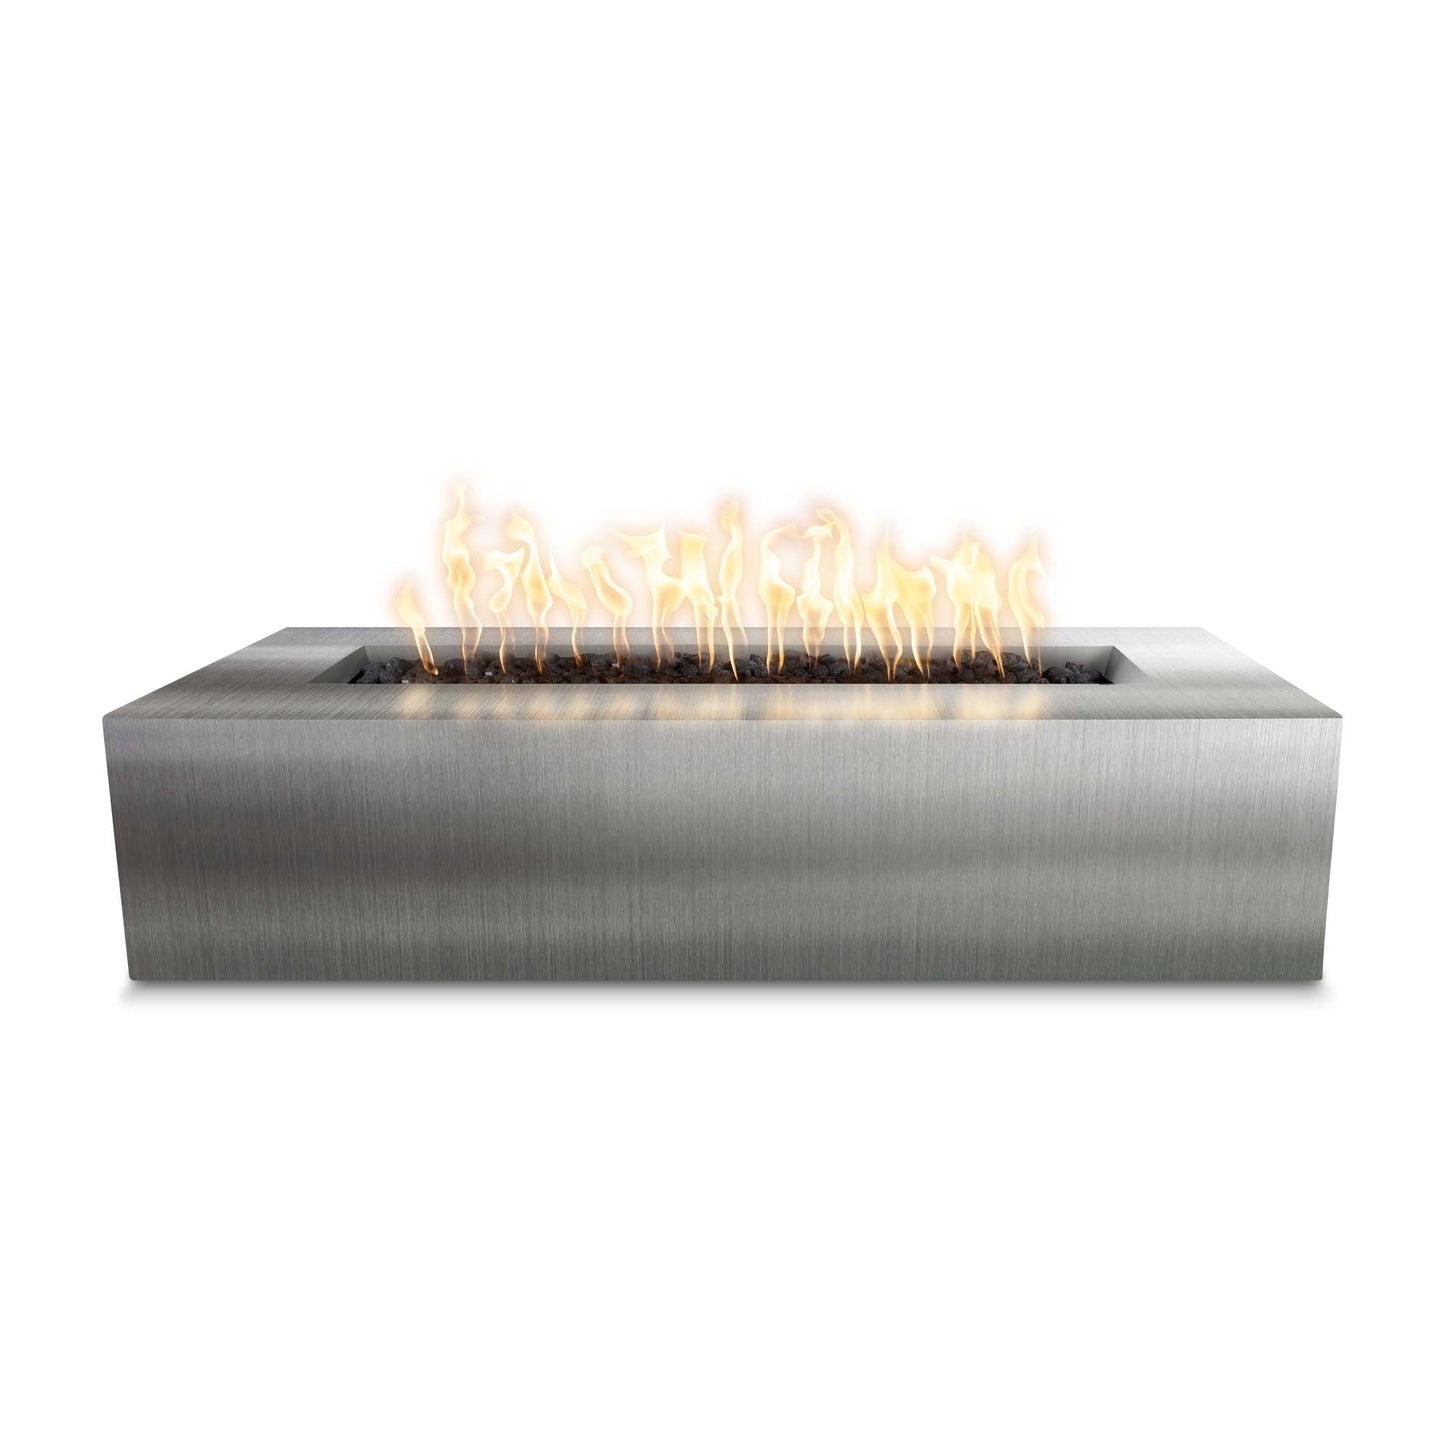 The Outdoor Plus Rectangular Regal 48" Stainless Steel Natural Gas Fire Pit with Flame Sense with Spark Ignition